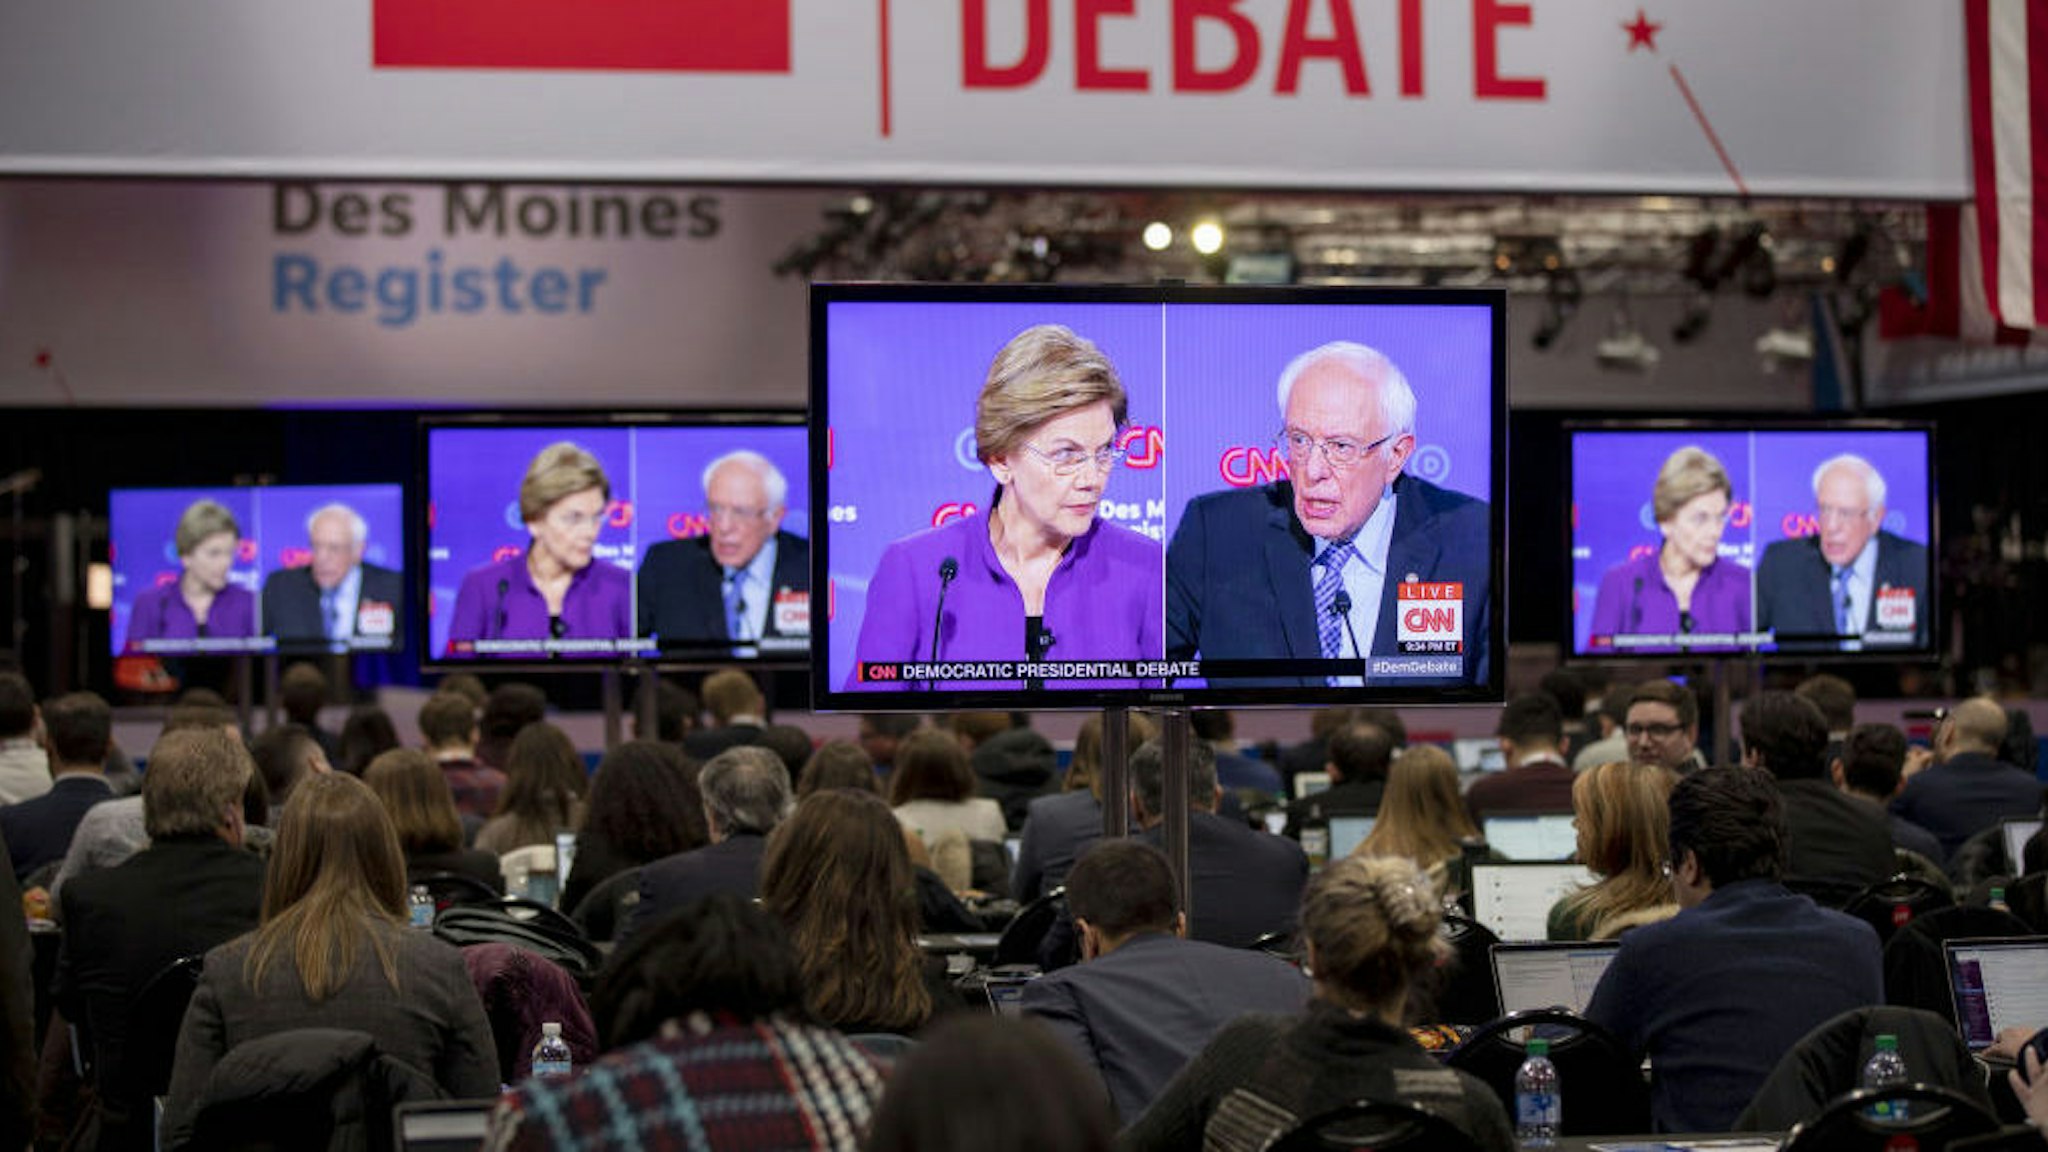 2020 Democratic presidential candidates Senator Elizabeth Warren, a Democrat from Massachusetts, left, and Senator Bernie Sanders, an independent from Vermont, are seen on television screens in the media center during the Democratic presidential debate in Des Moines, Iowa, U.S., on Tuesday, Jan. 14, 2020. The longstanding nonaggression pact between Elizabeth Warren and Bernie Sanders will be under strain at the seventh Democratic presidential debate Tuesday night after recent reports that Sanders has questioned whether a woman could get elected president. Photographer: Daniel Acker/Bloomberg